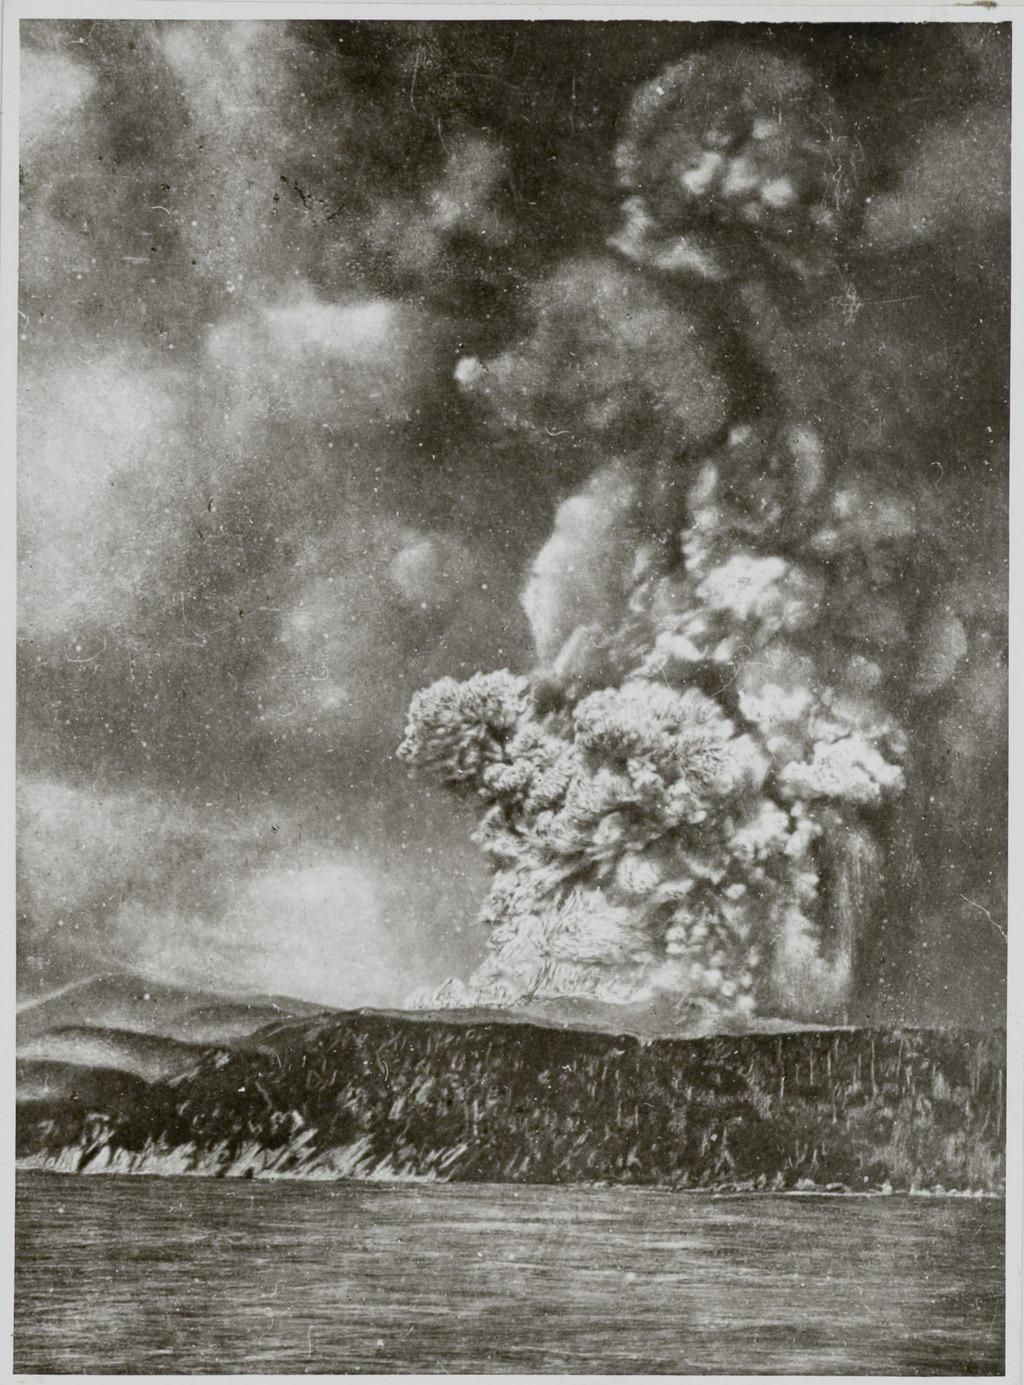 This 1883 photograph shows the aftermath of the eruption of Krakatoa. The explosive force of a 200-megatonne bomb killed 36,000 people and cooled the entire Earth by an average of 0.6°C. The ensuing tsunami waves reached as high as 150 ft, rocking ships as far away as South Africa.